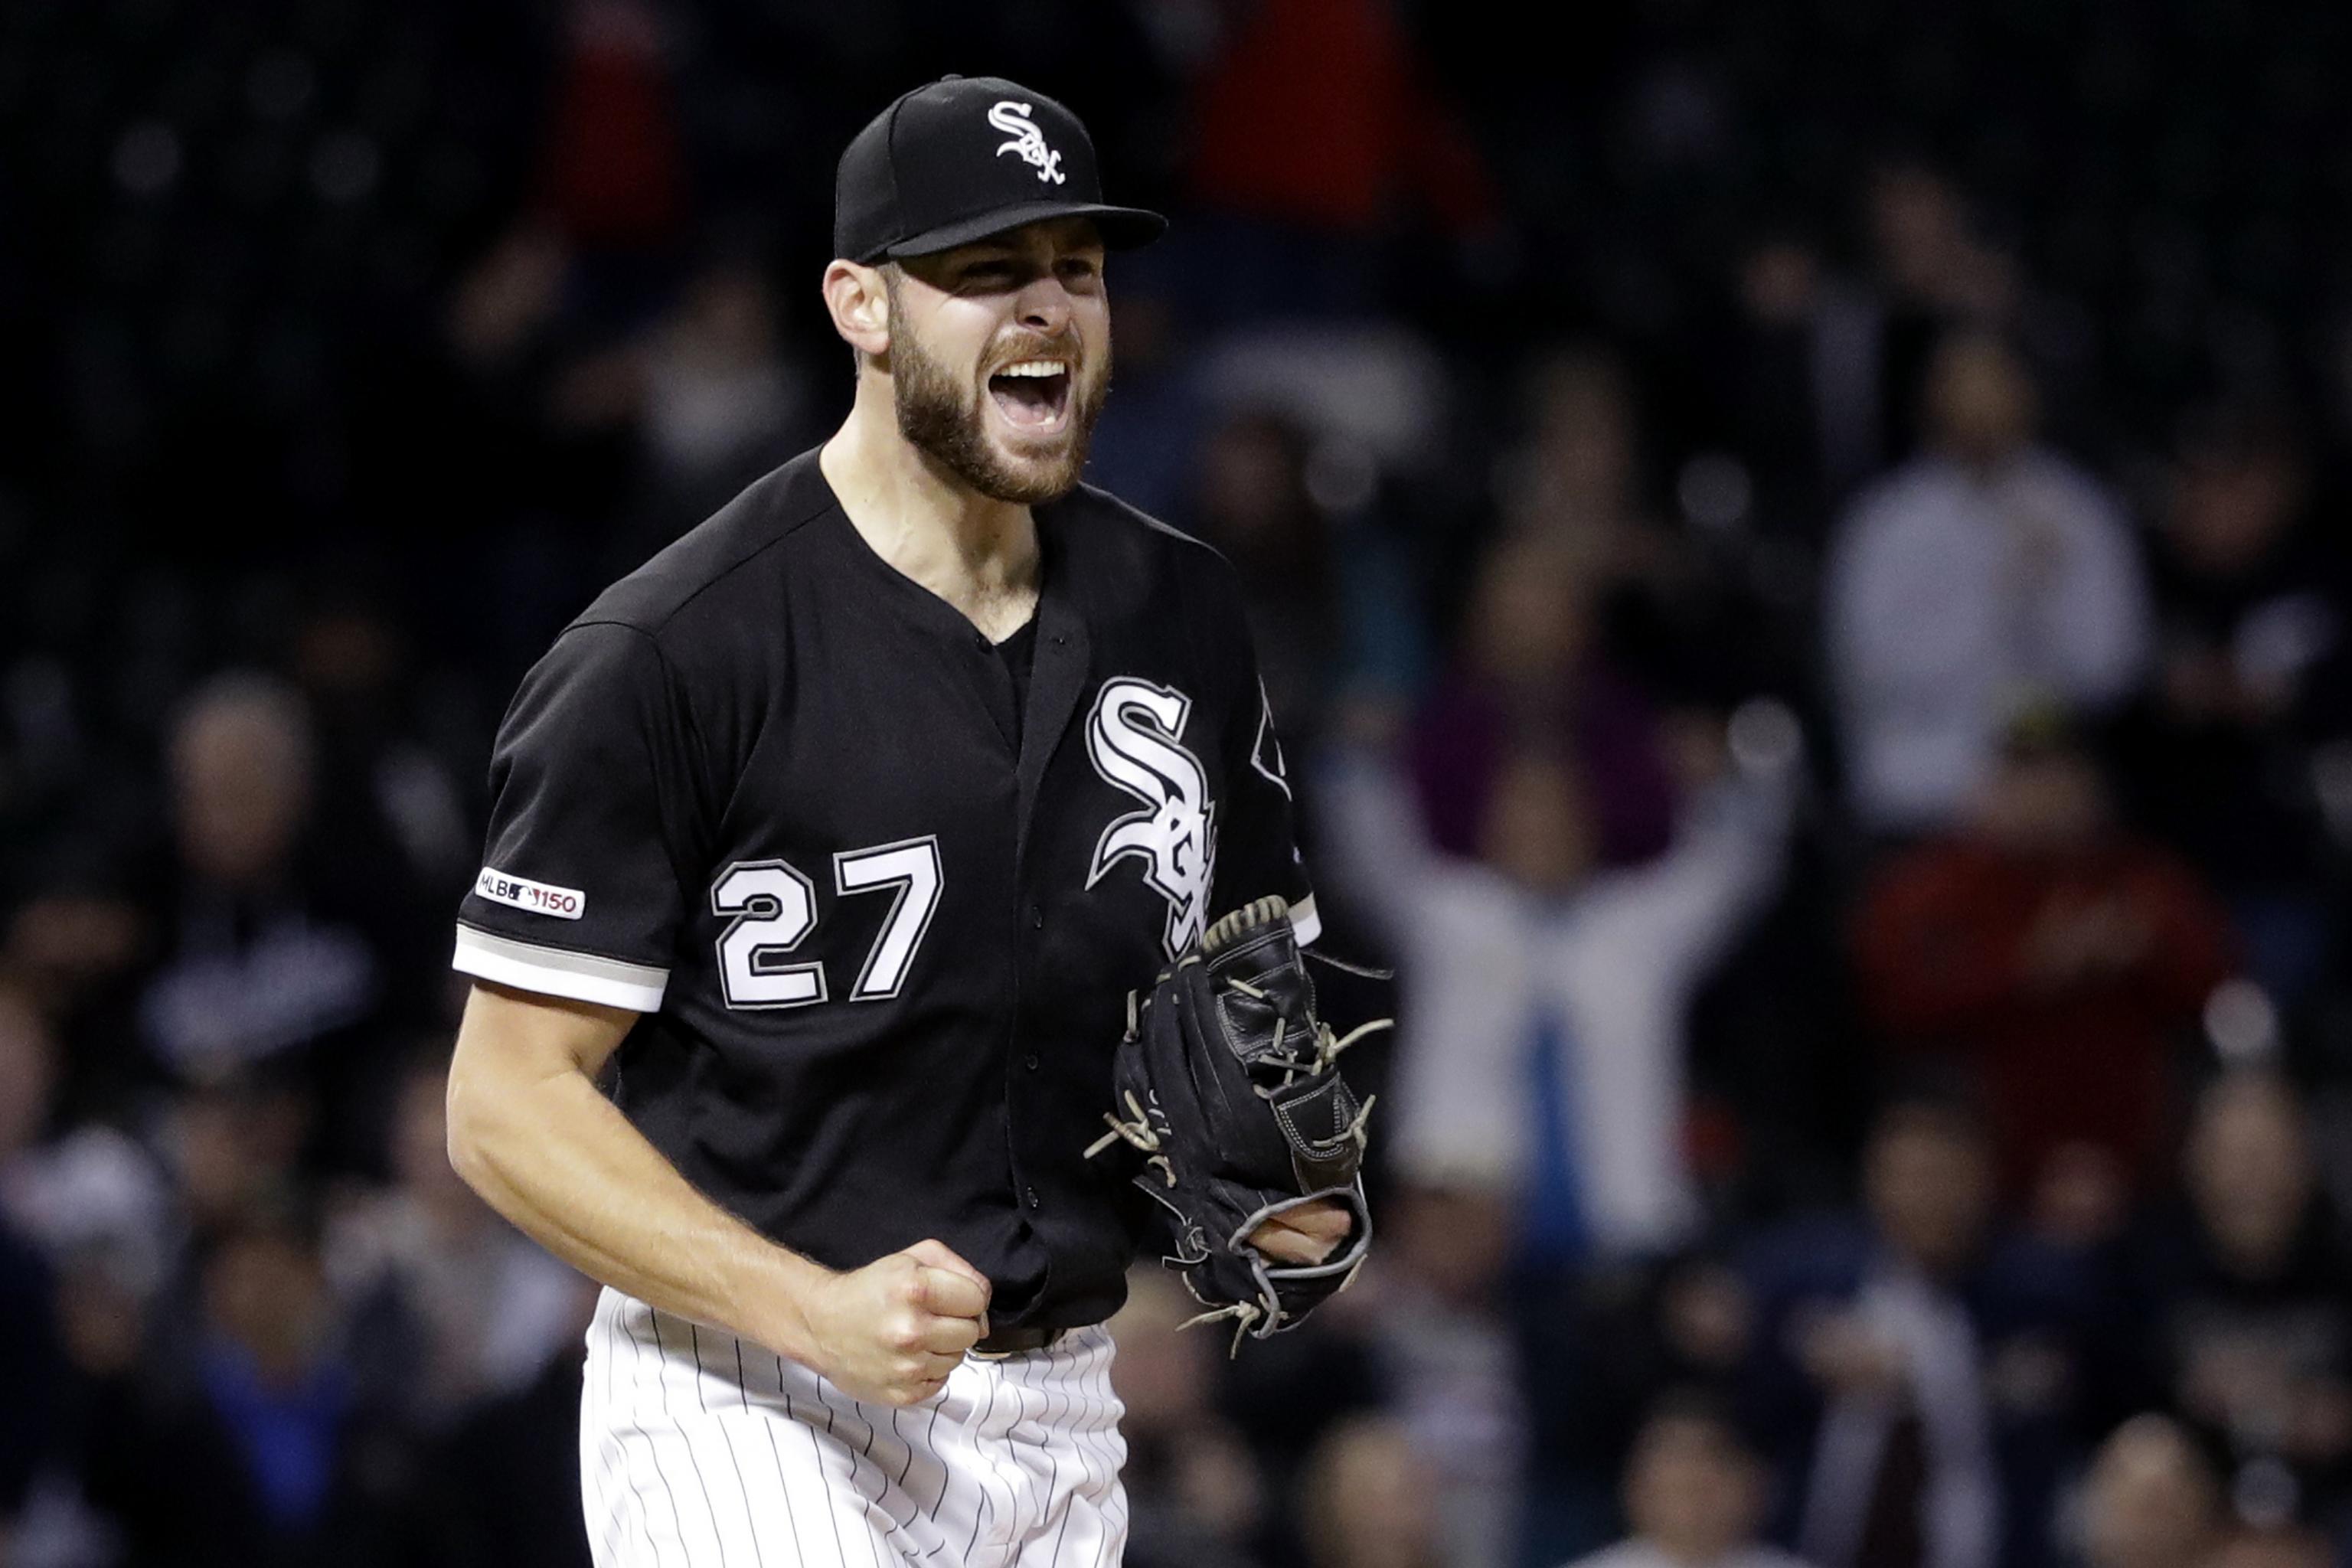 Lucas Giolito looks to deliver on high expectations